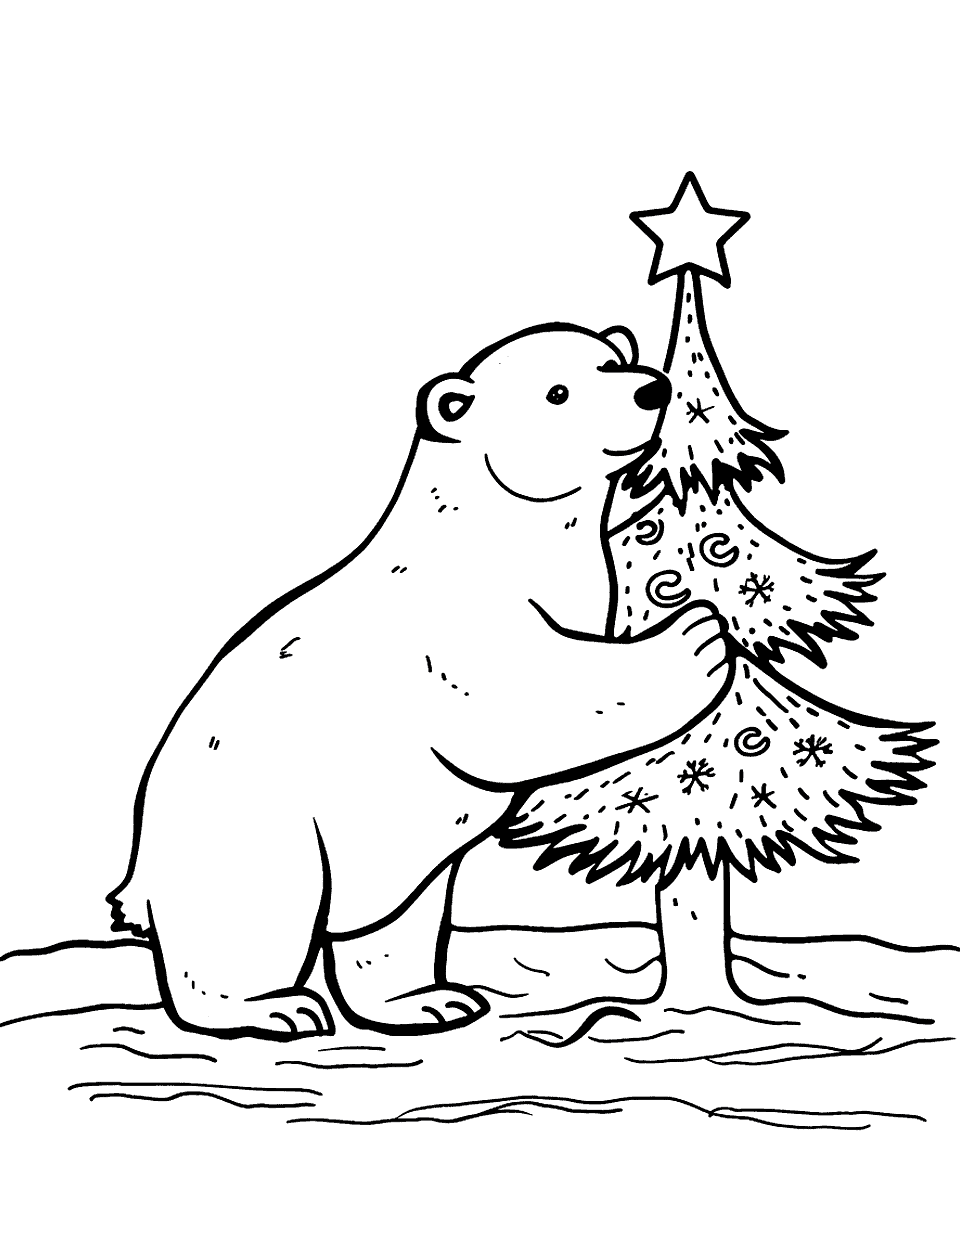 Polar Bear with Christmas Tree Coloring Page - A polar bear decorating a small Christmas tree.